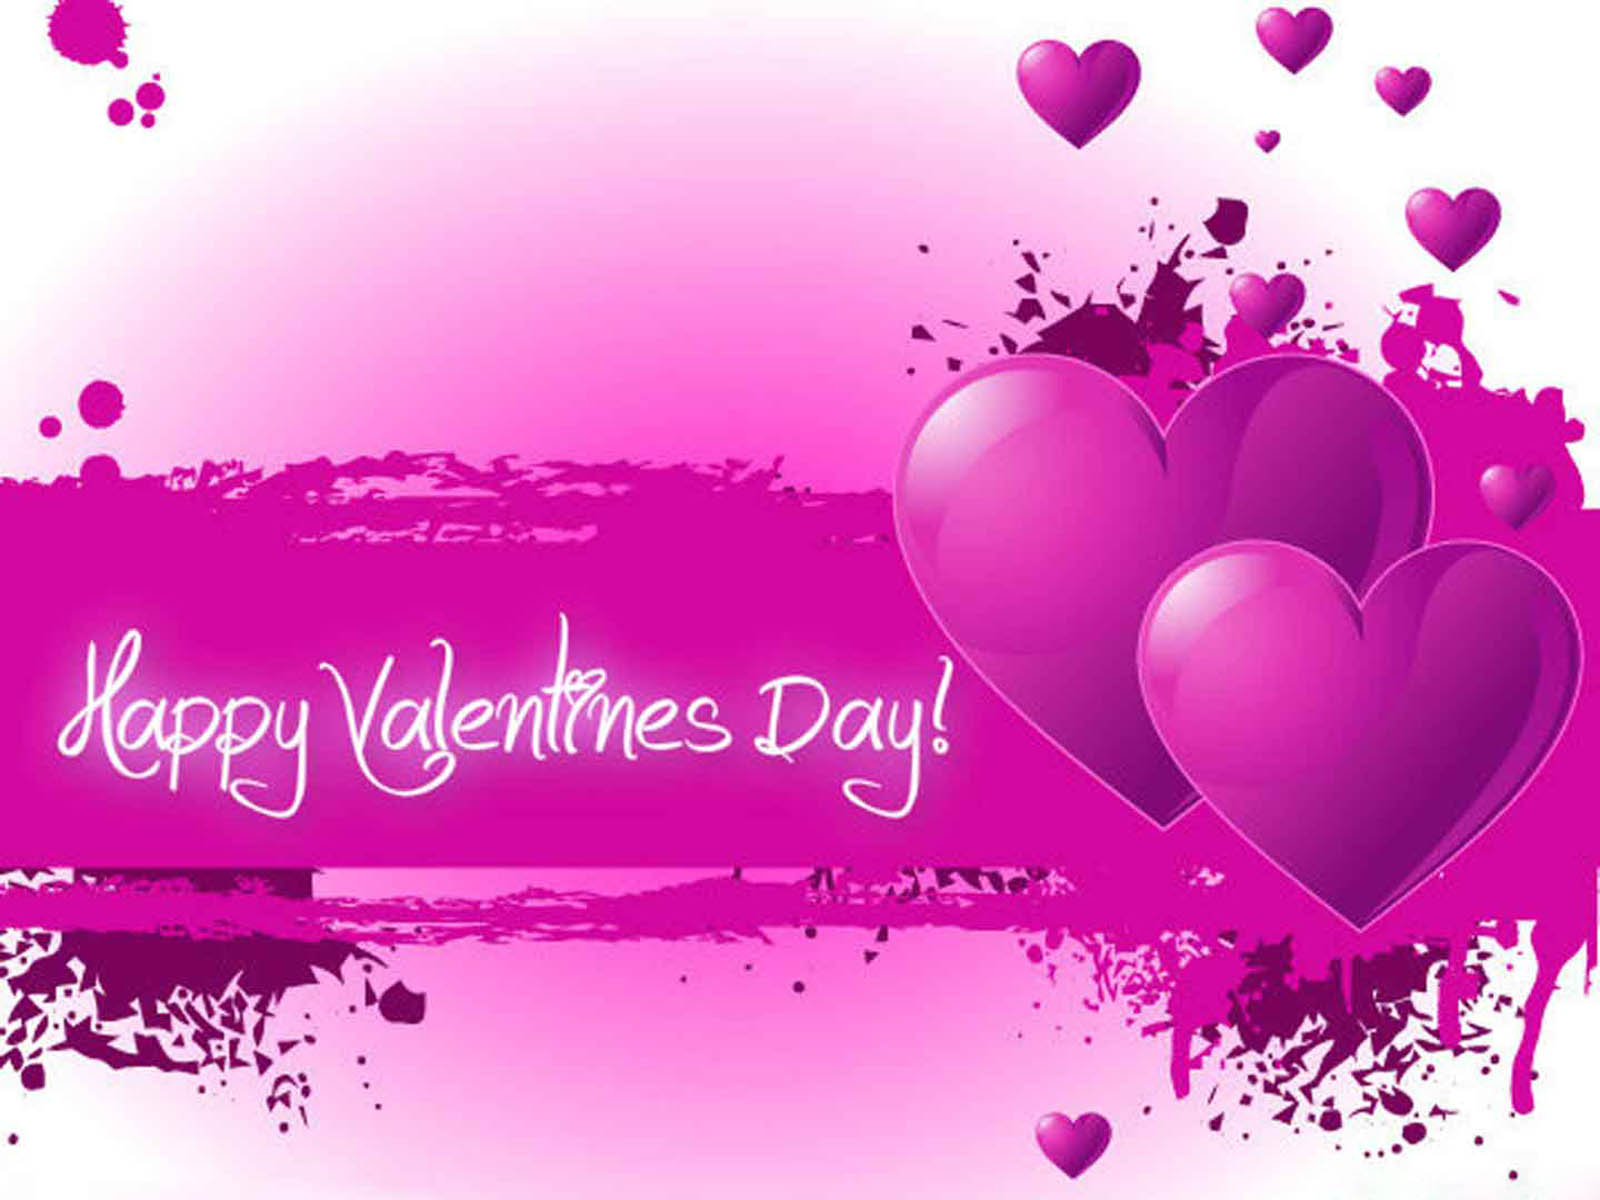 wallpaper: Valentines Day Wallpapers 2013